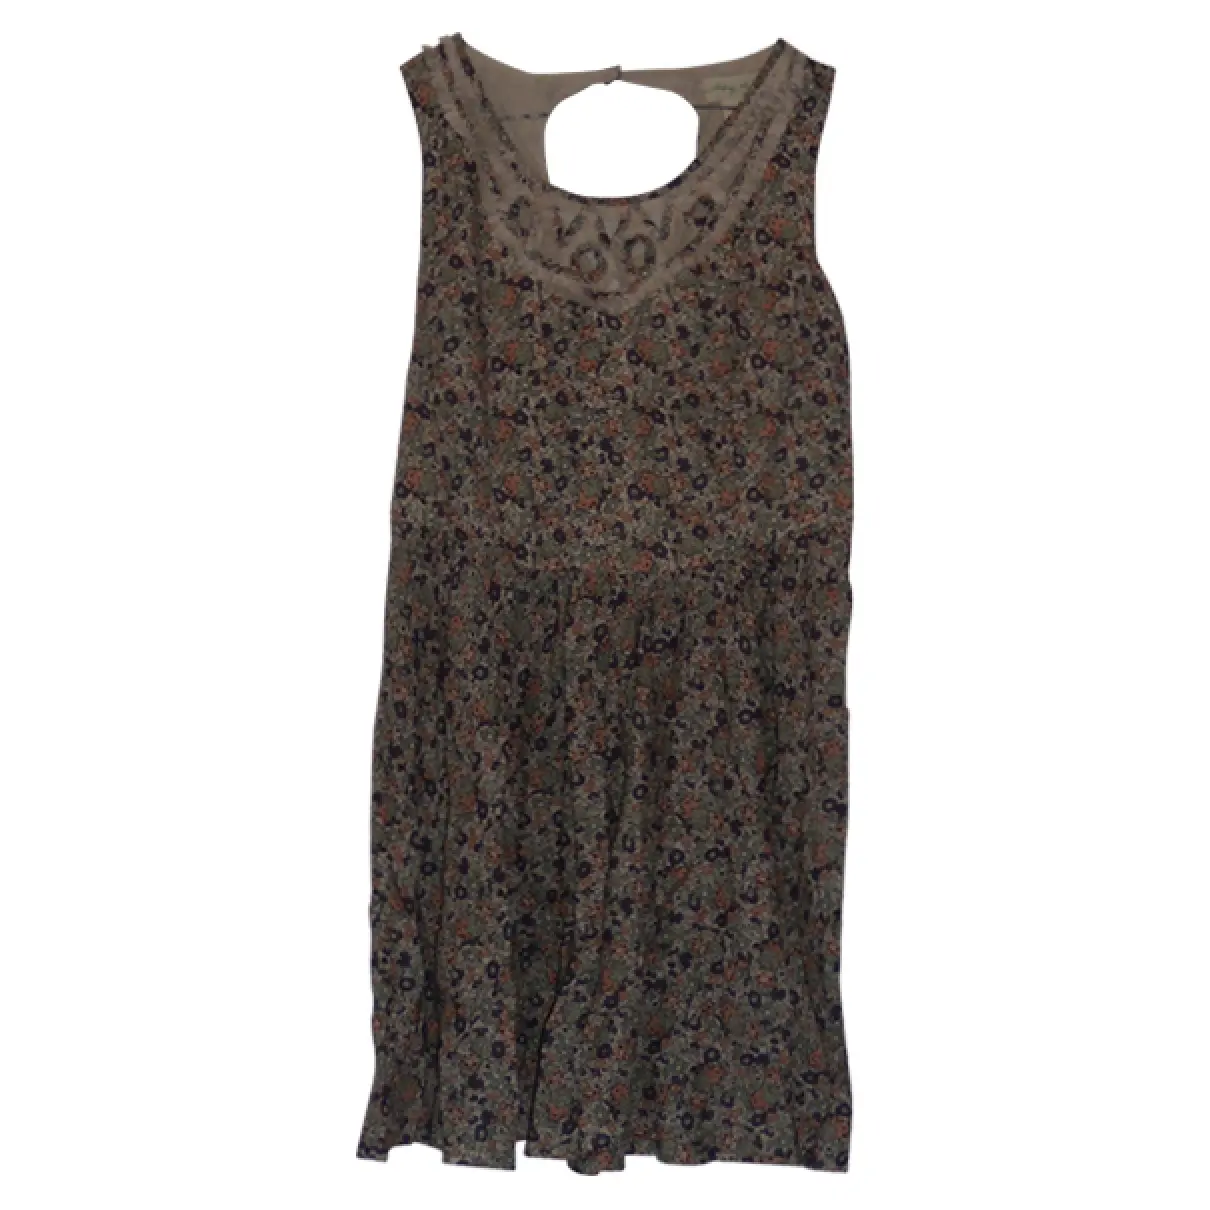 Liberty print Cotton Dress Urban Outfitters